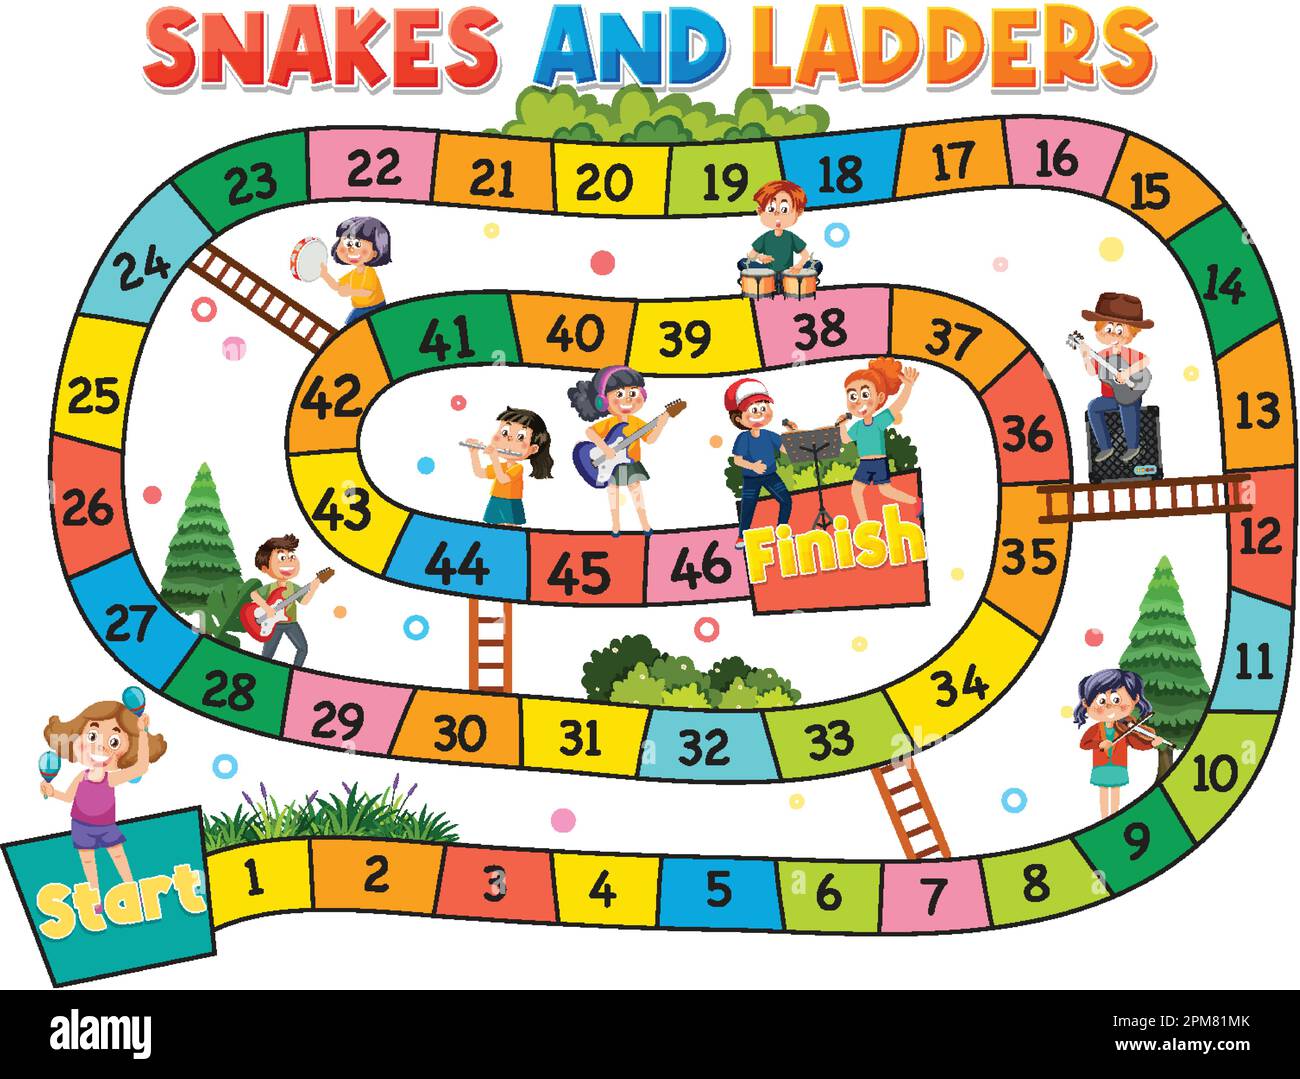 Snakes ladders game Stock Vector Images - Page 2 - Alamy